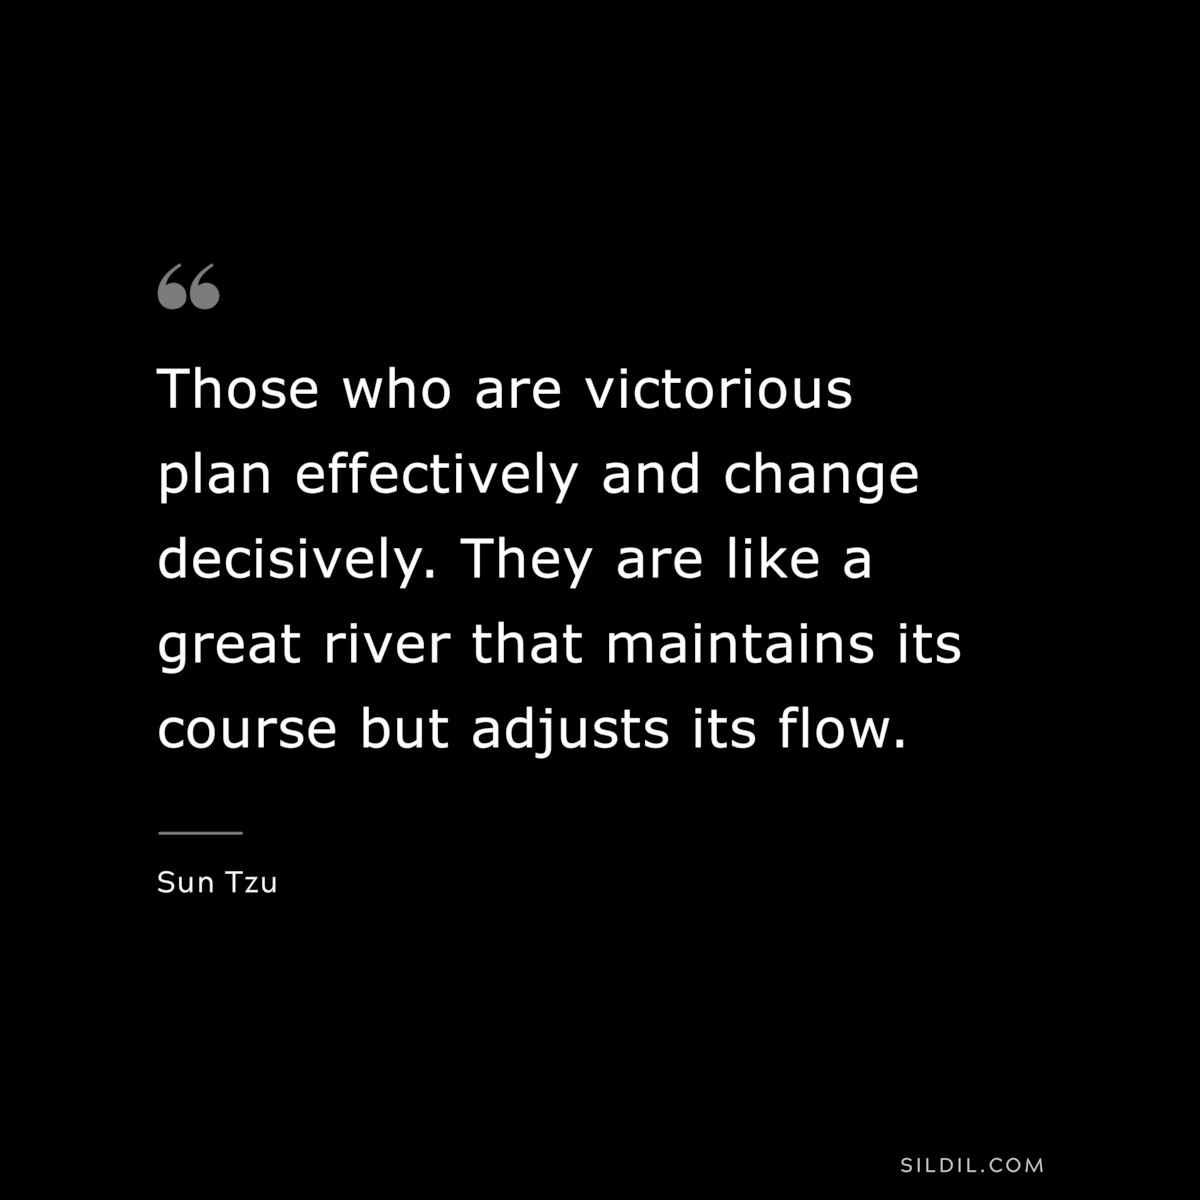 Those who are victorious plan effectively and change decisively. They are like a great river that maintains its course but adjusts its flow.― Sun Tzu